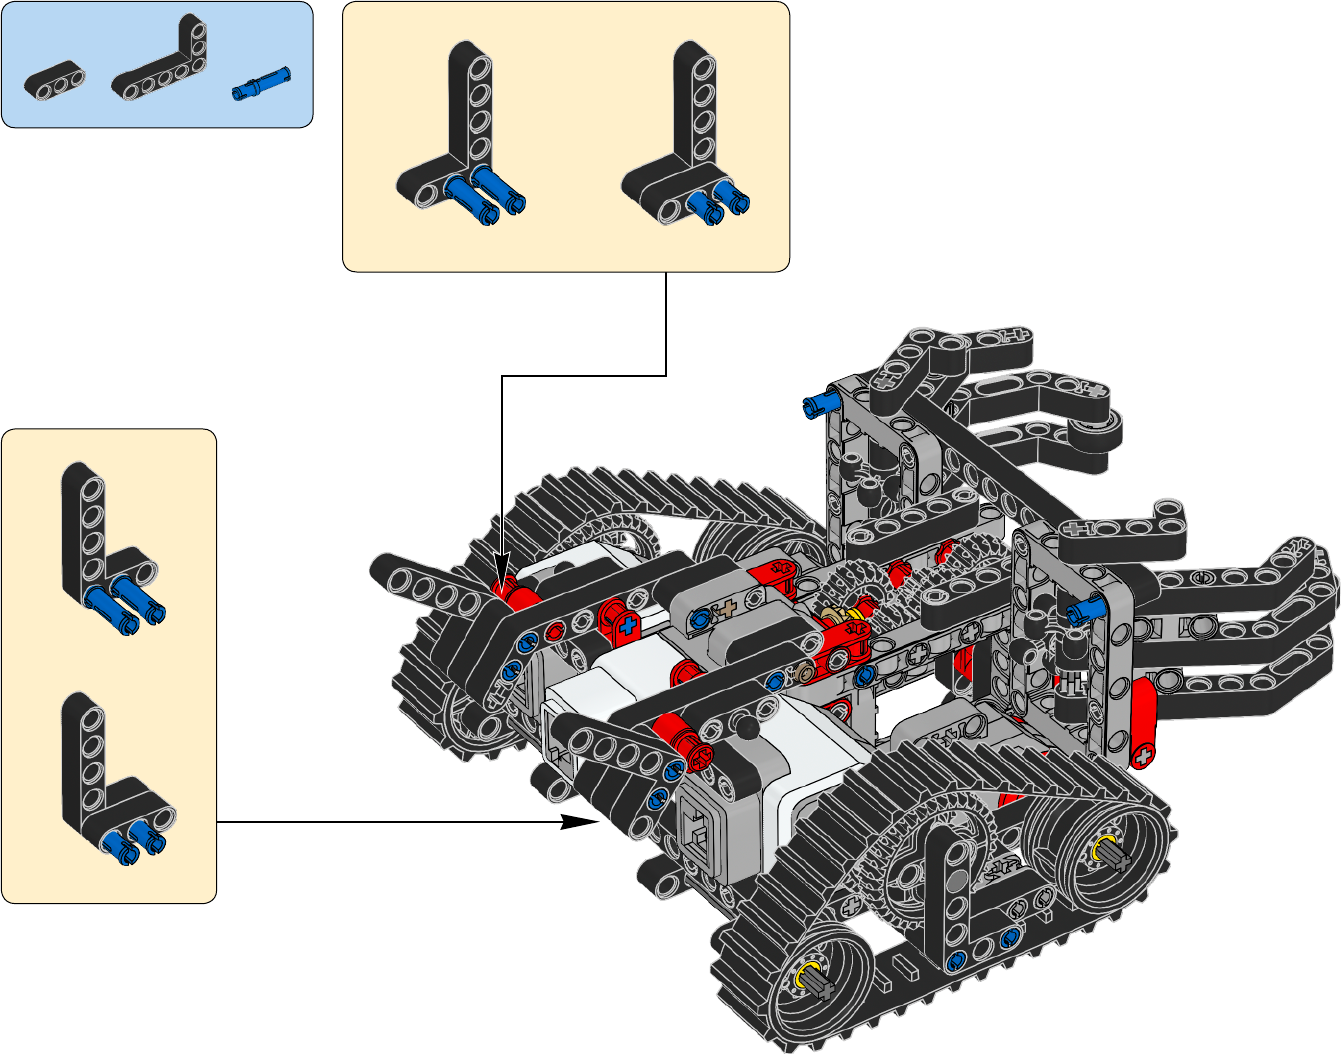 Manual Lego GRIPP3R Mindstorms EV3 (page 45 of 114) (All